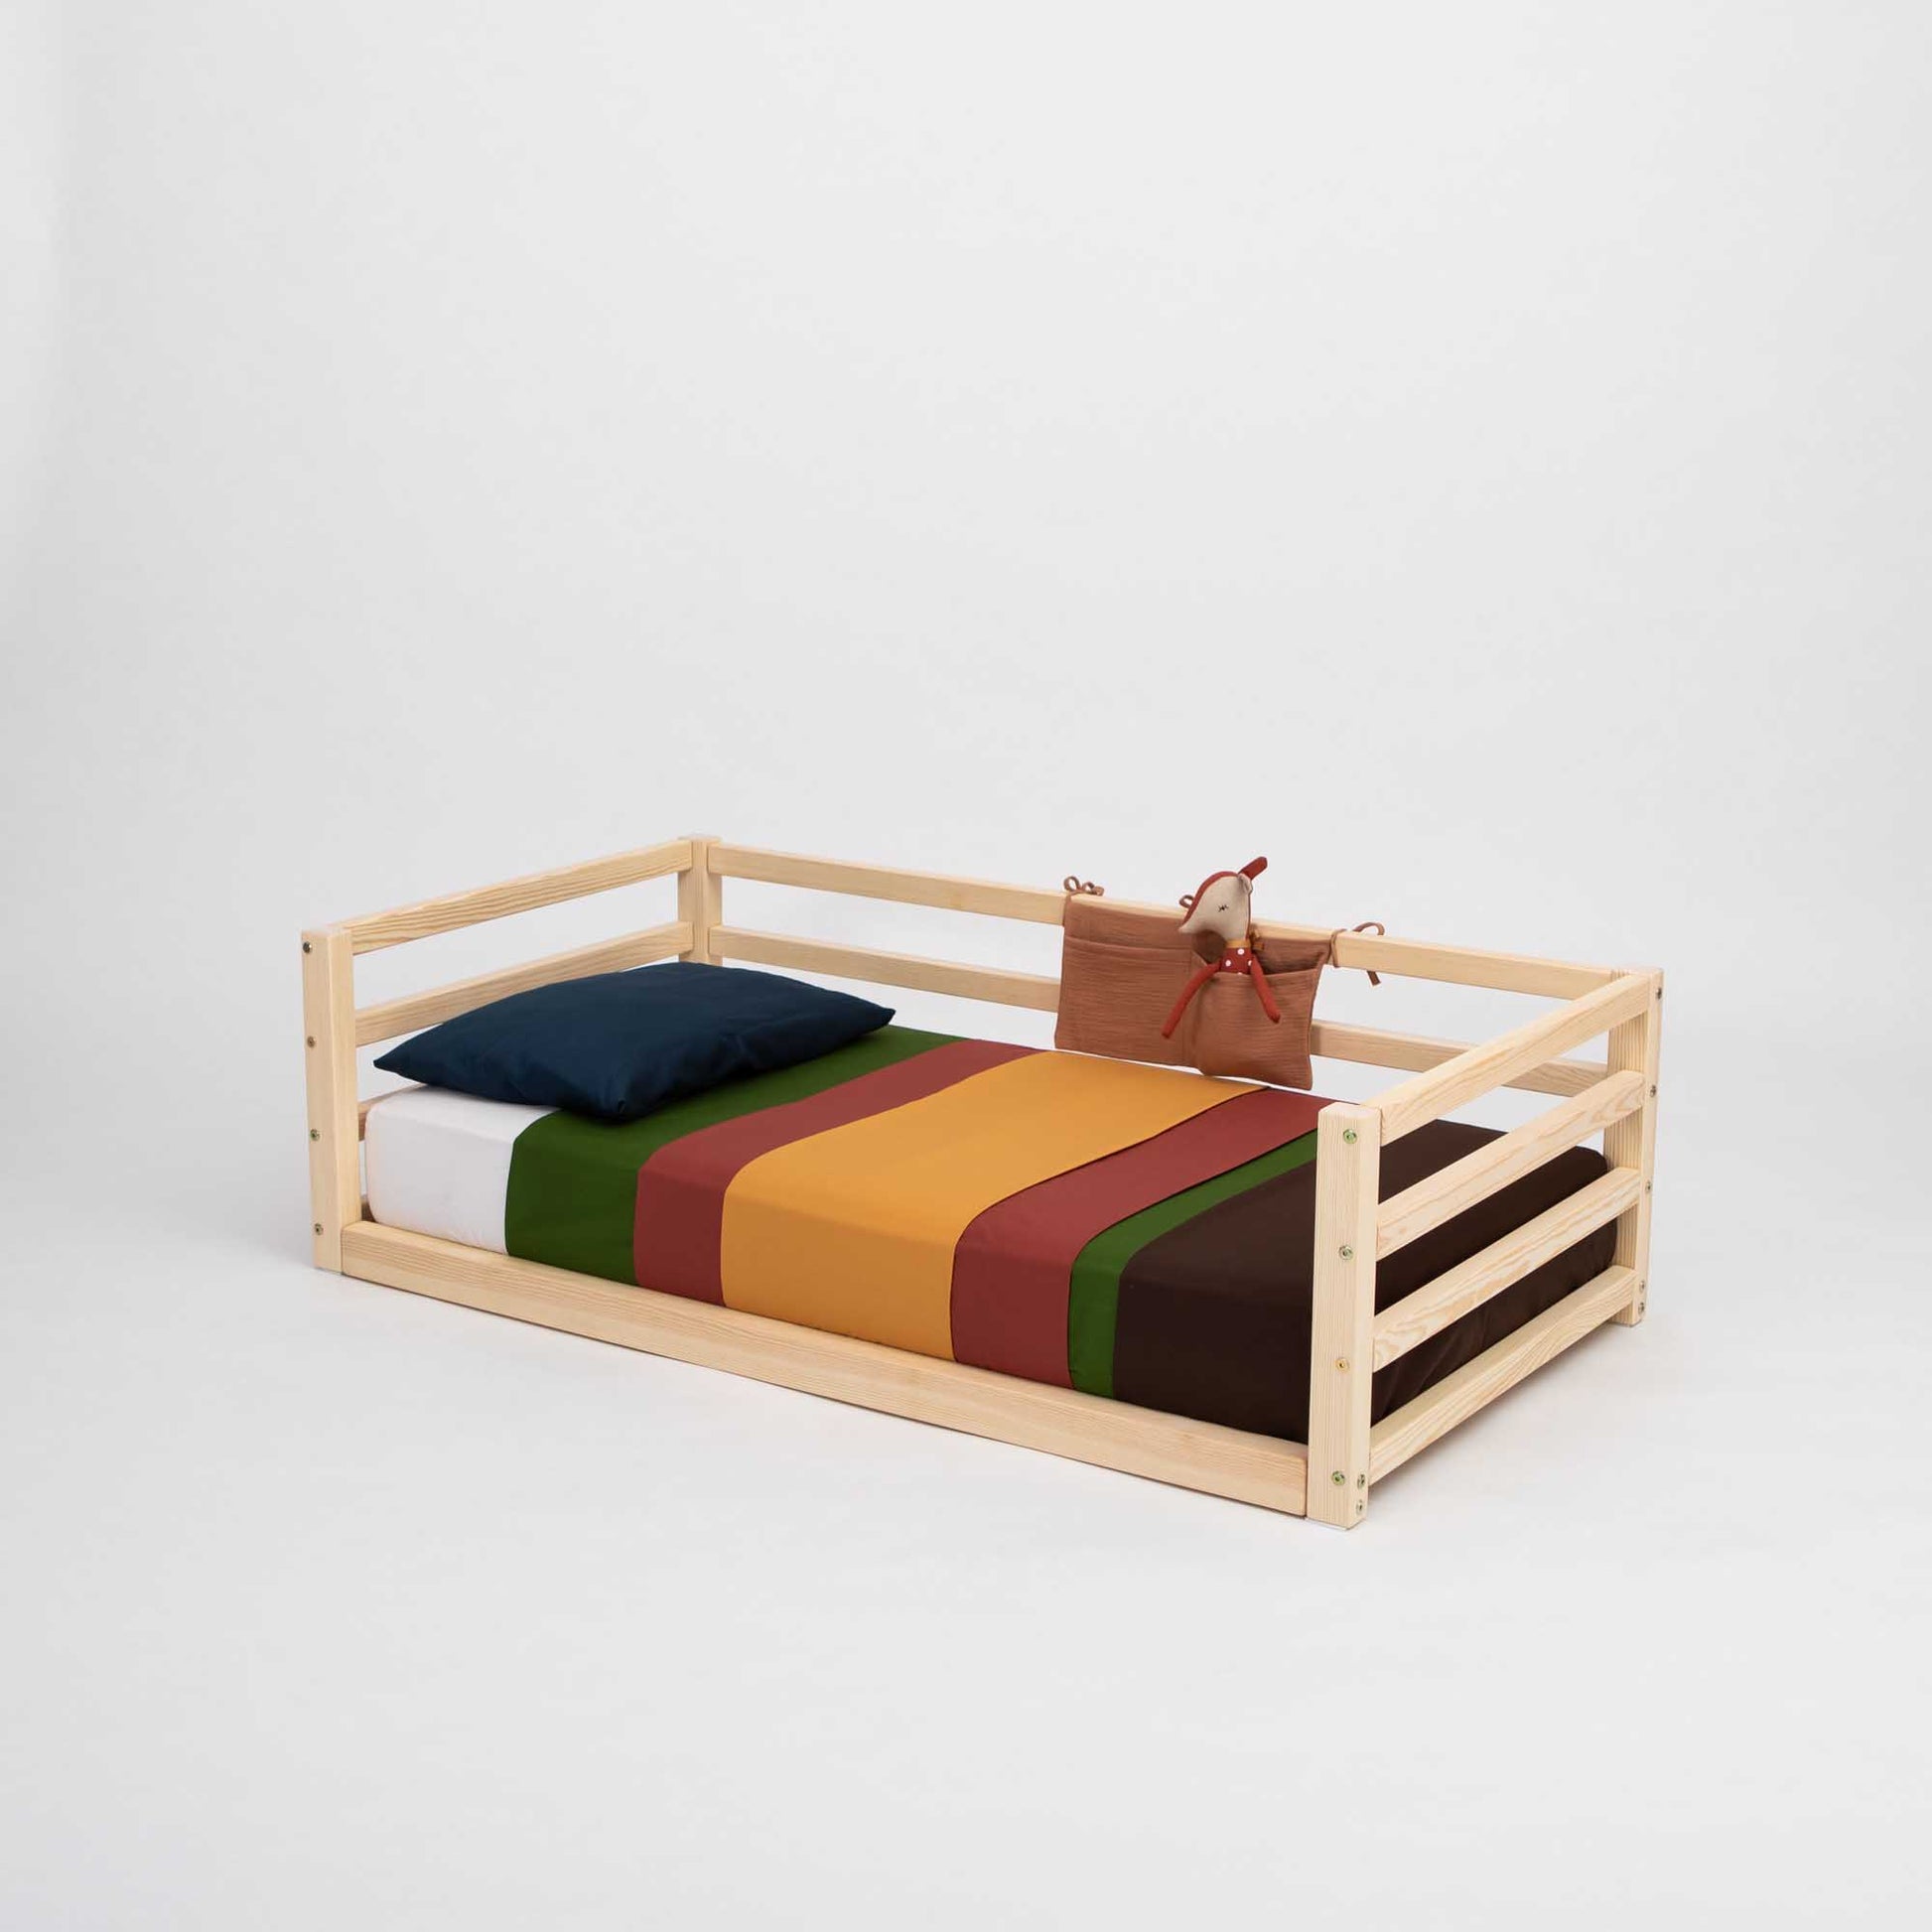 A colorful striped child's bed with a 2-in-1 transformable kids' bed with a 3-sided horizontal rail design from Sweet Home From Wood.